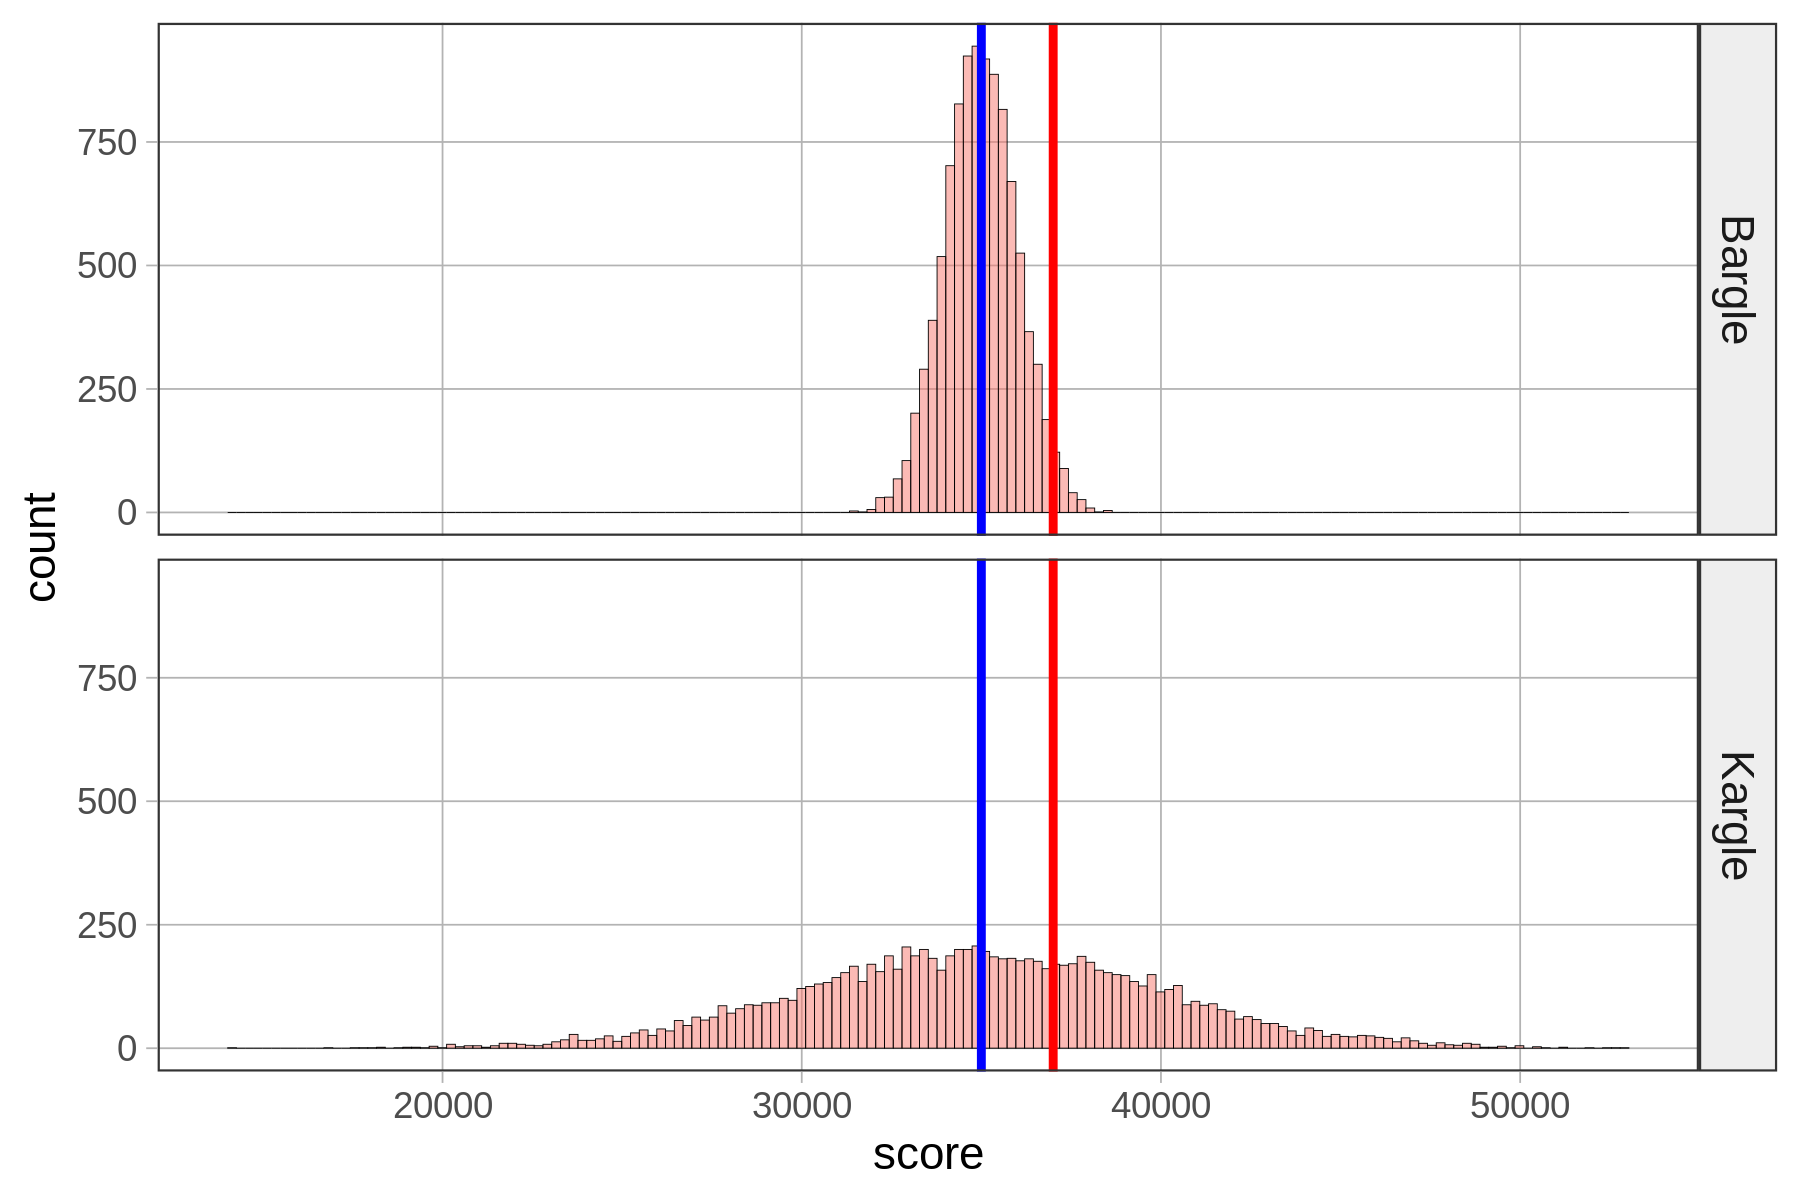 A histogram of the distribution of score in Bargle with a vertical line in blue showing the mean of 35,000 points and another vertical line in red showing a score of 37,000 points on the top. A histogram of the distribution of score in Kargle with a vertical line in blue showing the mean of 35,000 points and another vertical line in red showing a score of 37,000 points at the bottom. They are both normal but the Kargle distribution is much flatter and more spread out than the Bargle distribution.